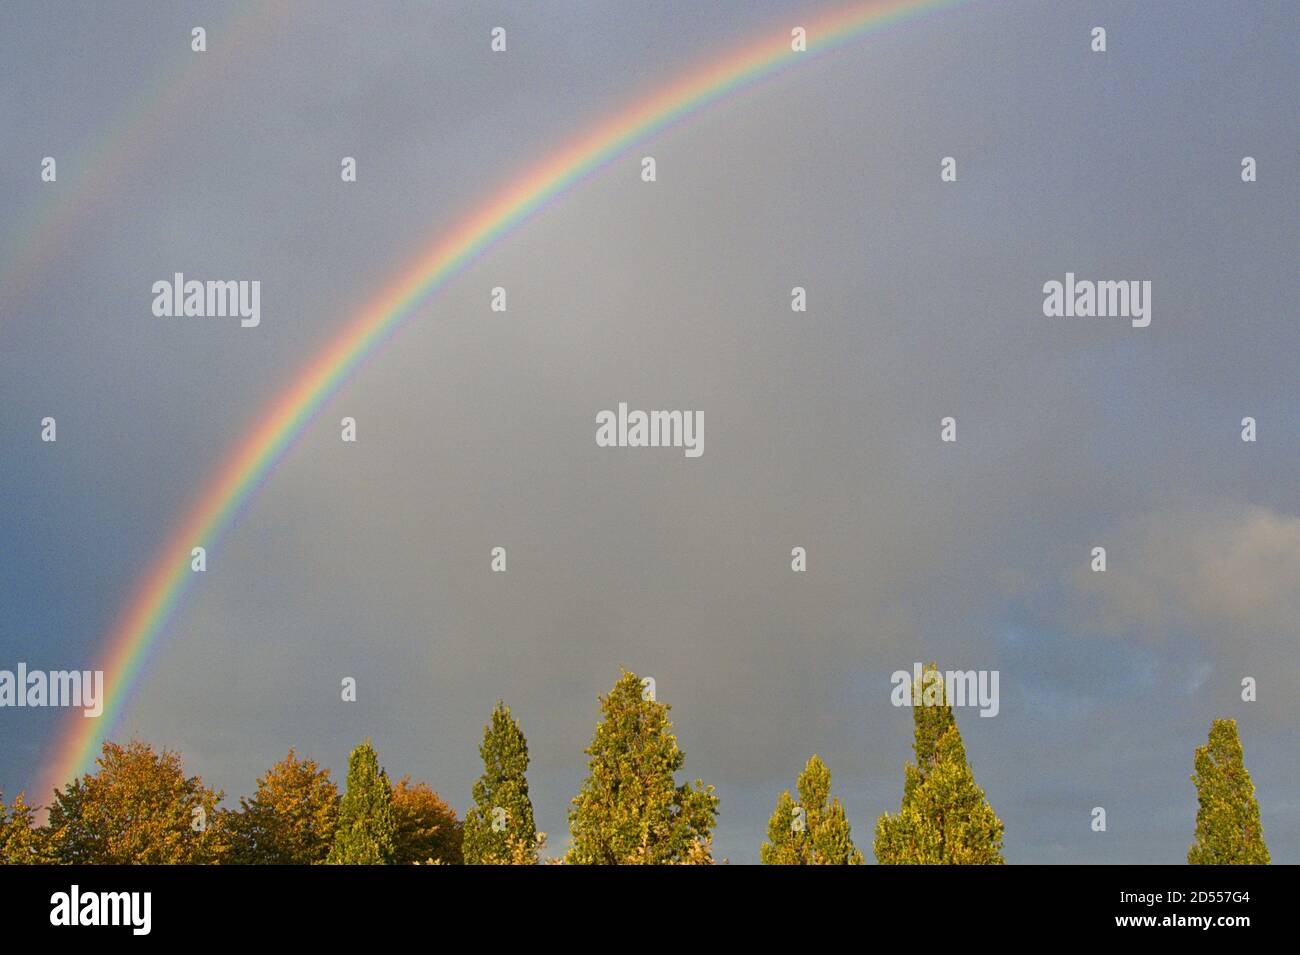 October 7th, 2020, a powerful rainbow in the dark cloudy sky over Schleswig. The arc-shaped, colored light band is created when the sun shines on a wall of rain and the light is broken into its spectral colors. | usage worldwide Stock Photo